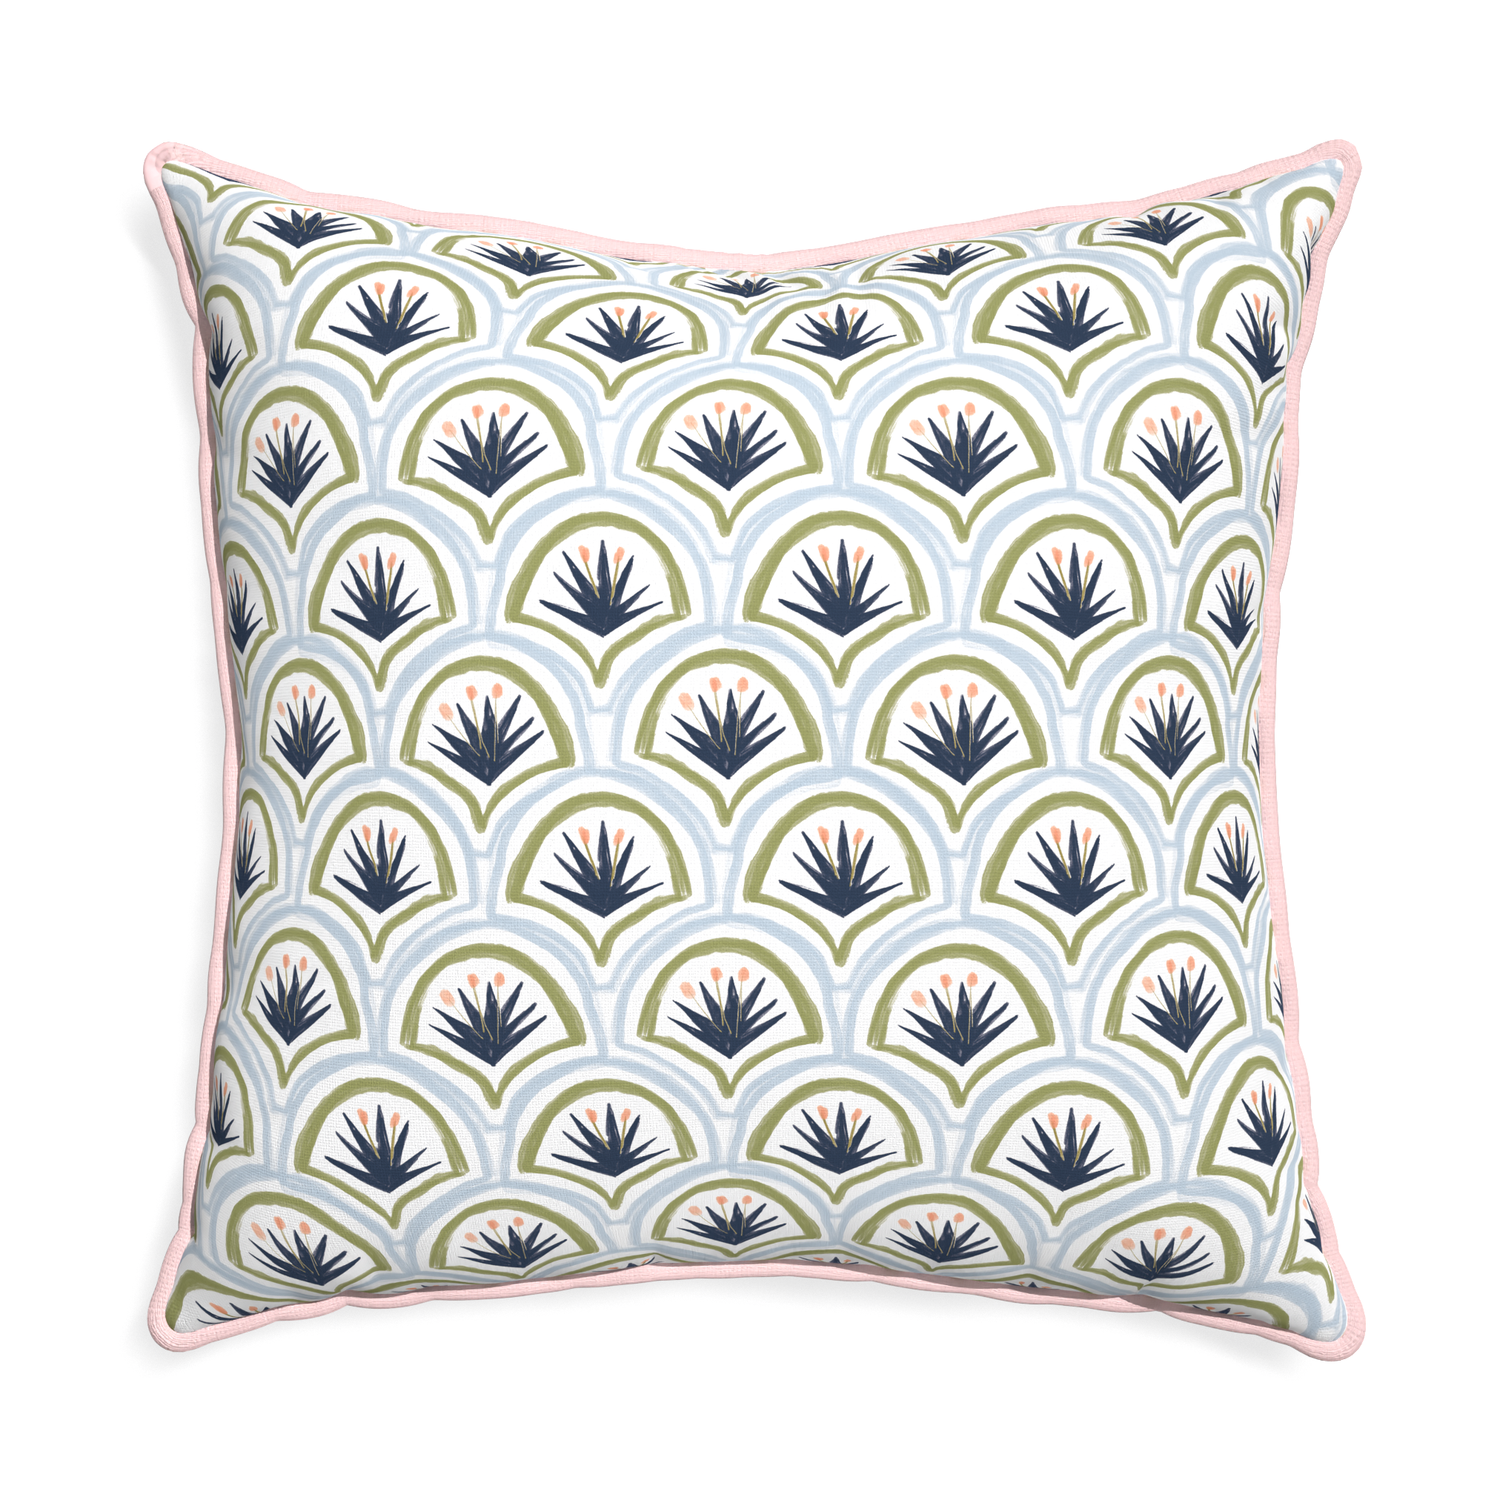 Euro-sham thatcher midnight custom art deco palm patternpillow with petal piping on white background